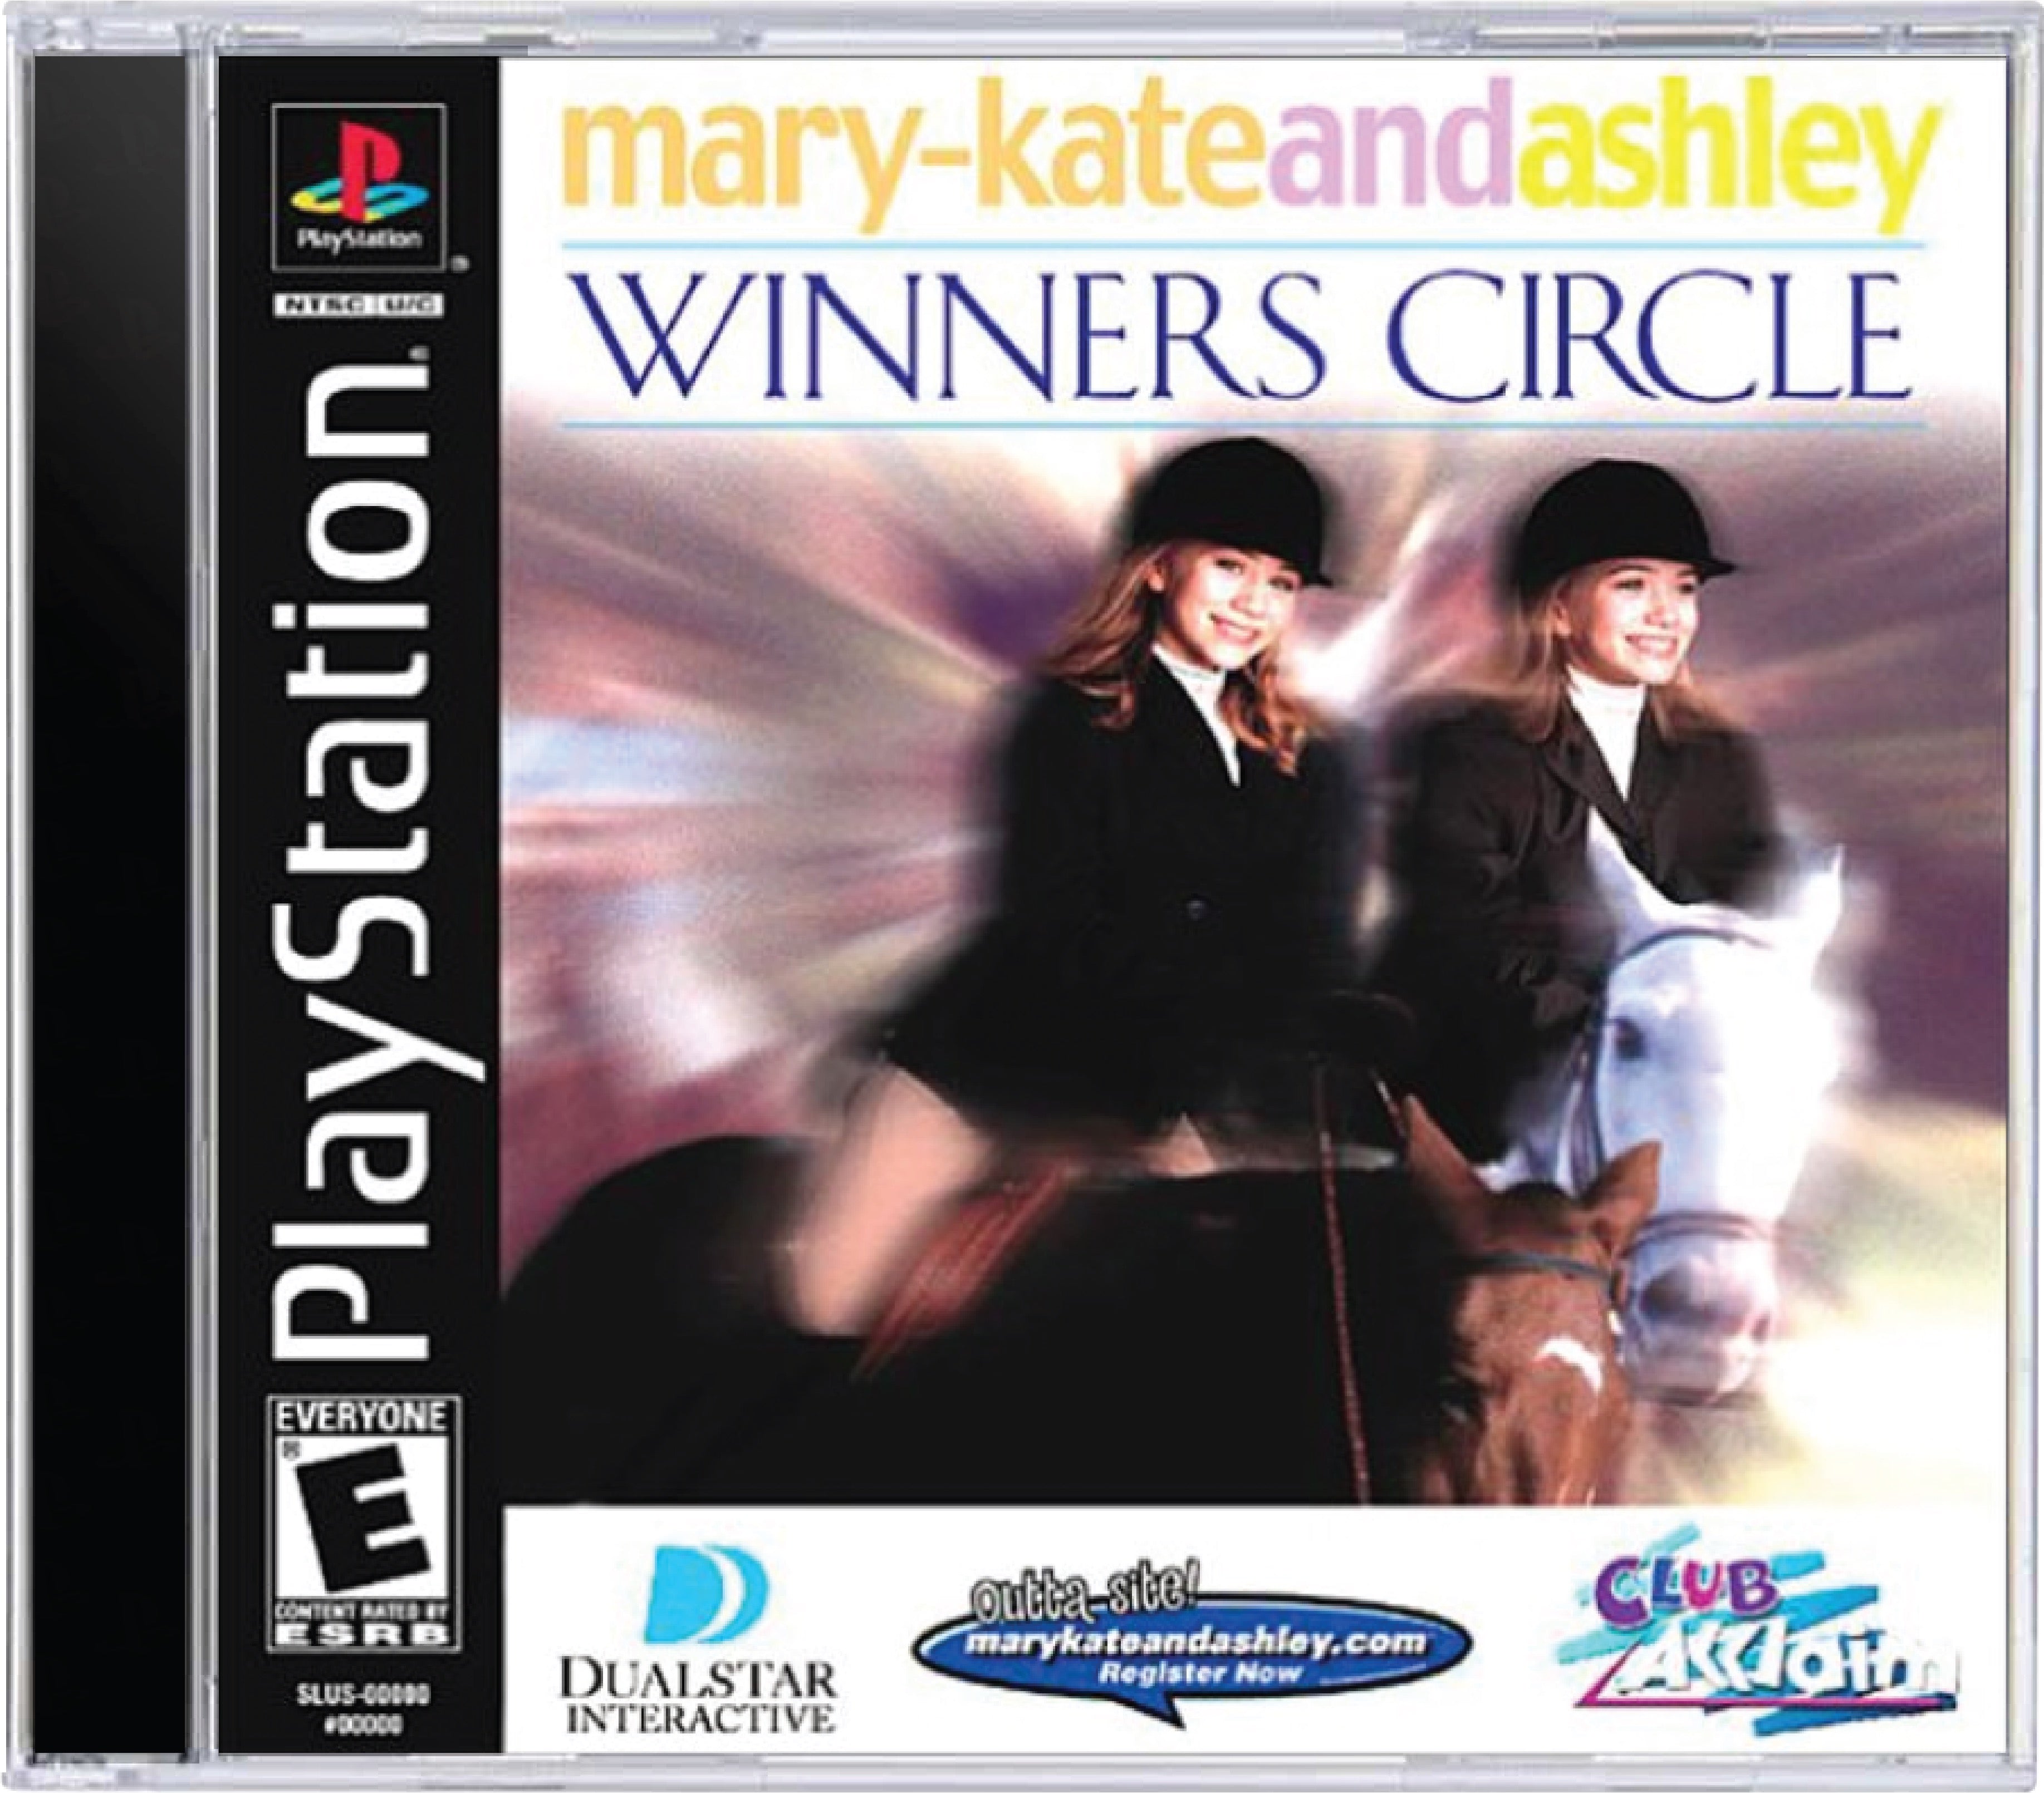 Mary-Kate and Ashley Winner's Circle Cover Art and Product Photo